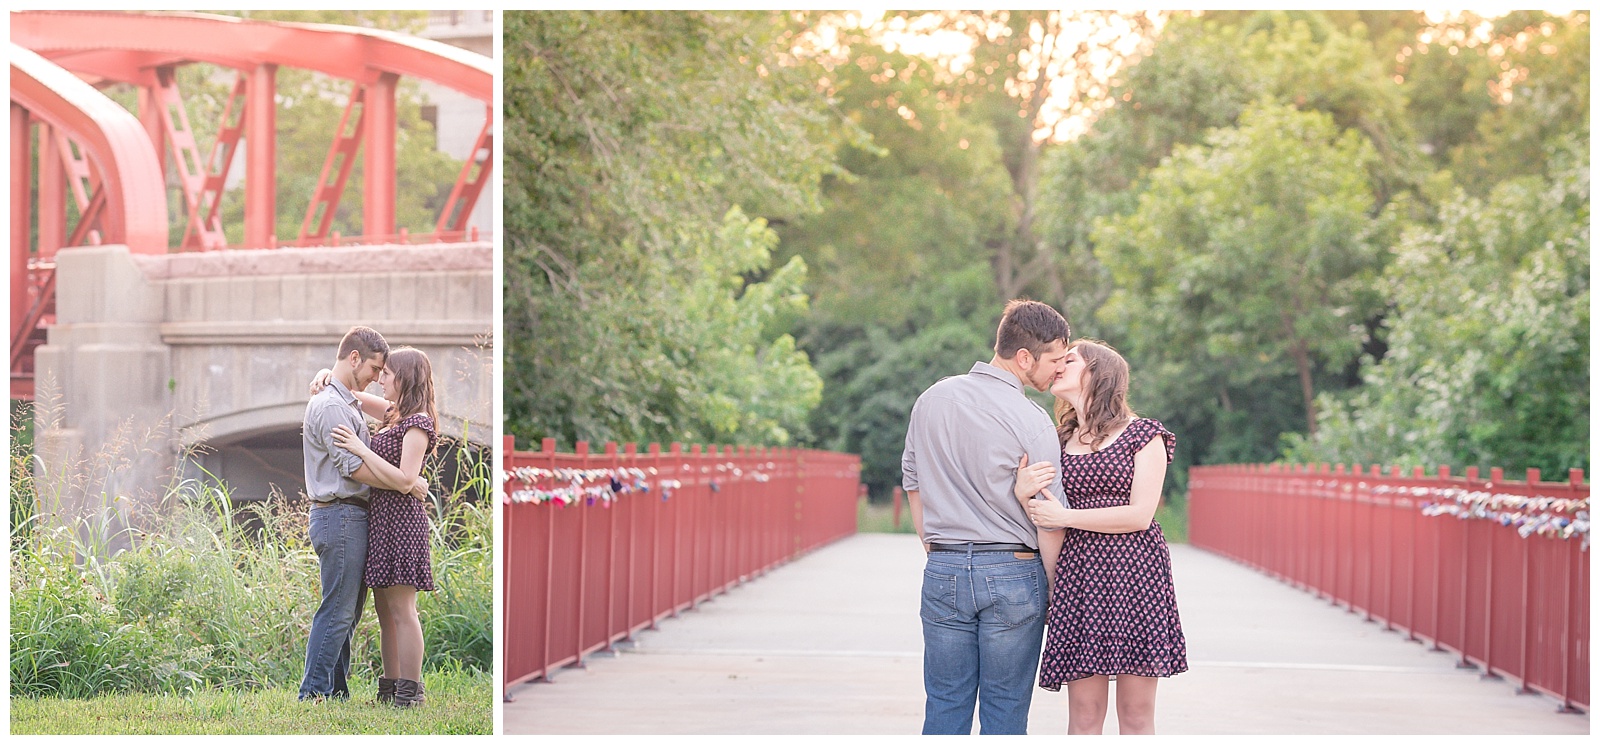 An engagement session at the Old Red Bridge in Minor Park in Kansas City.